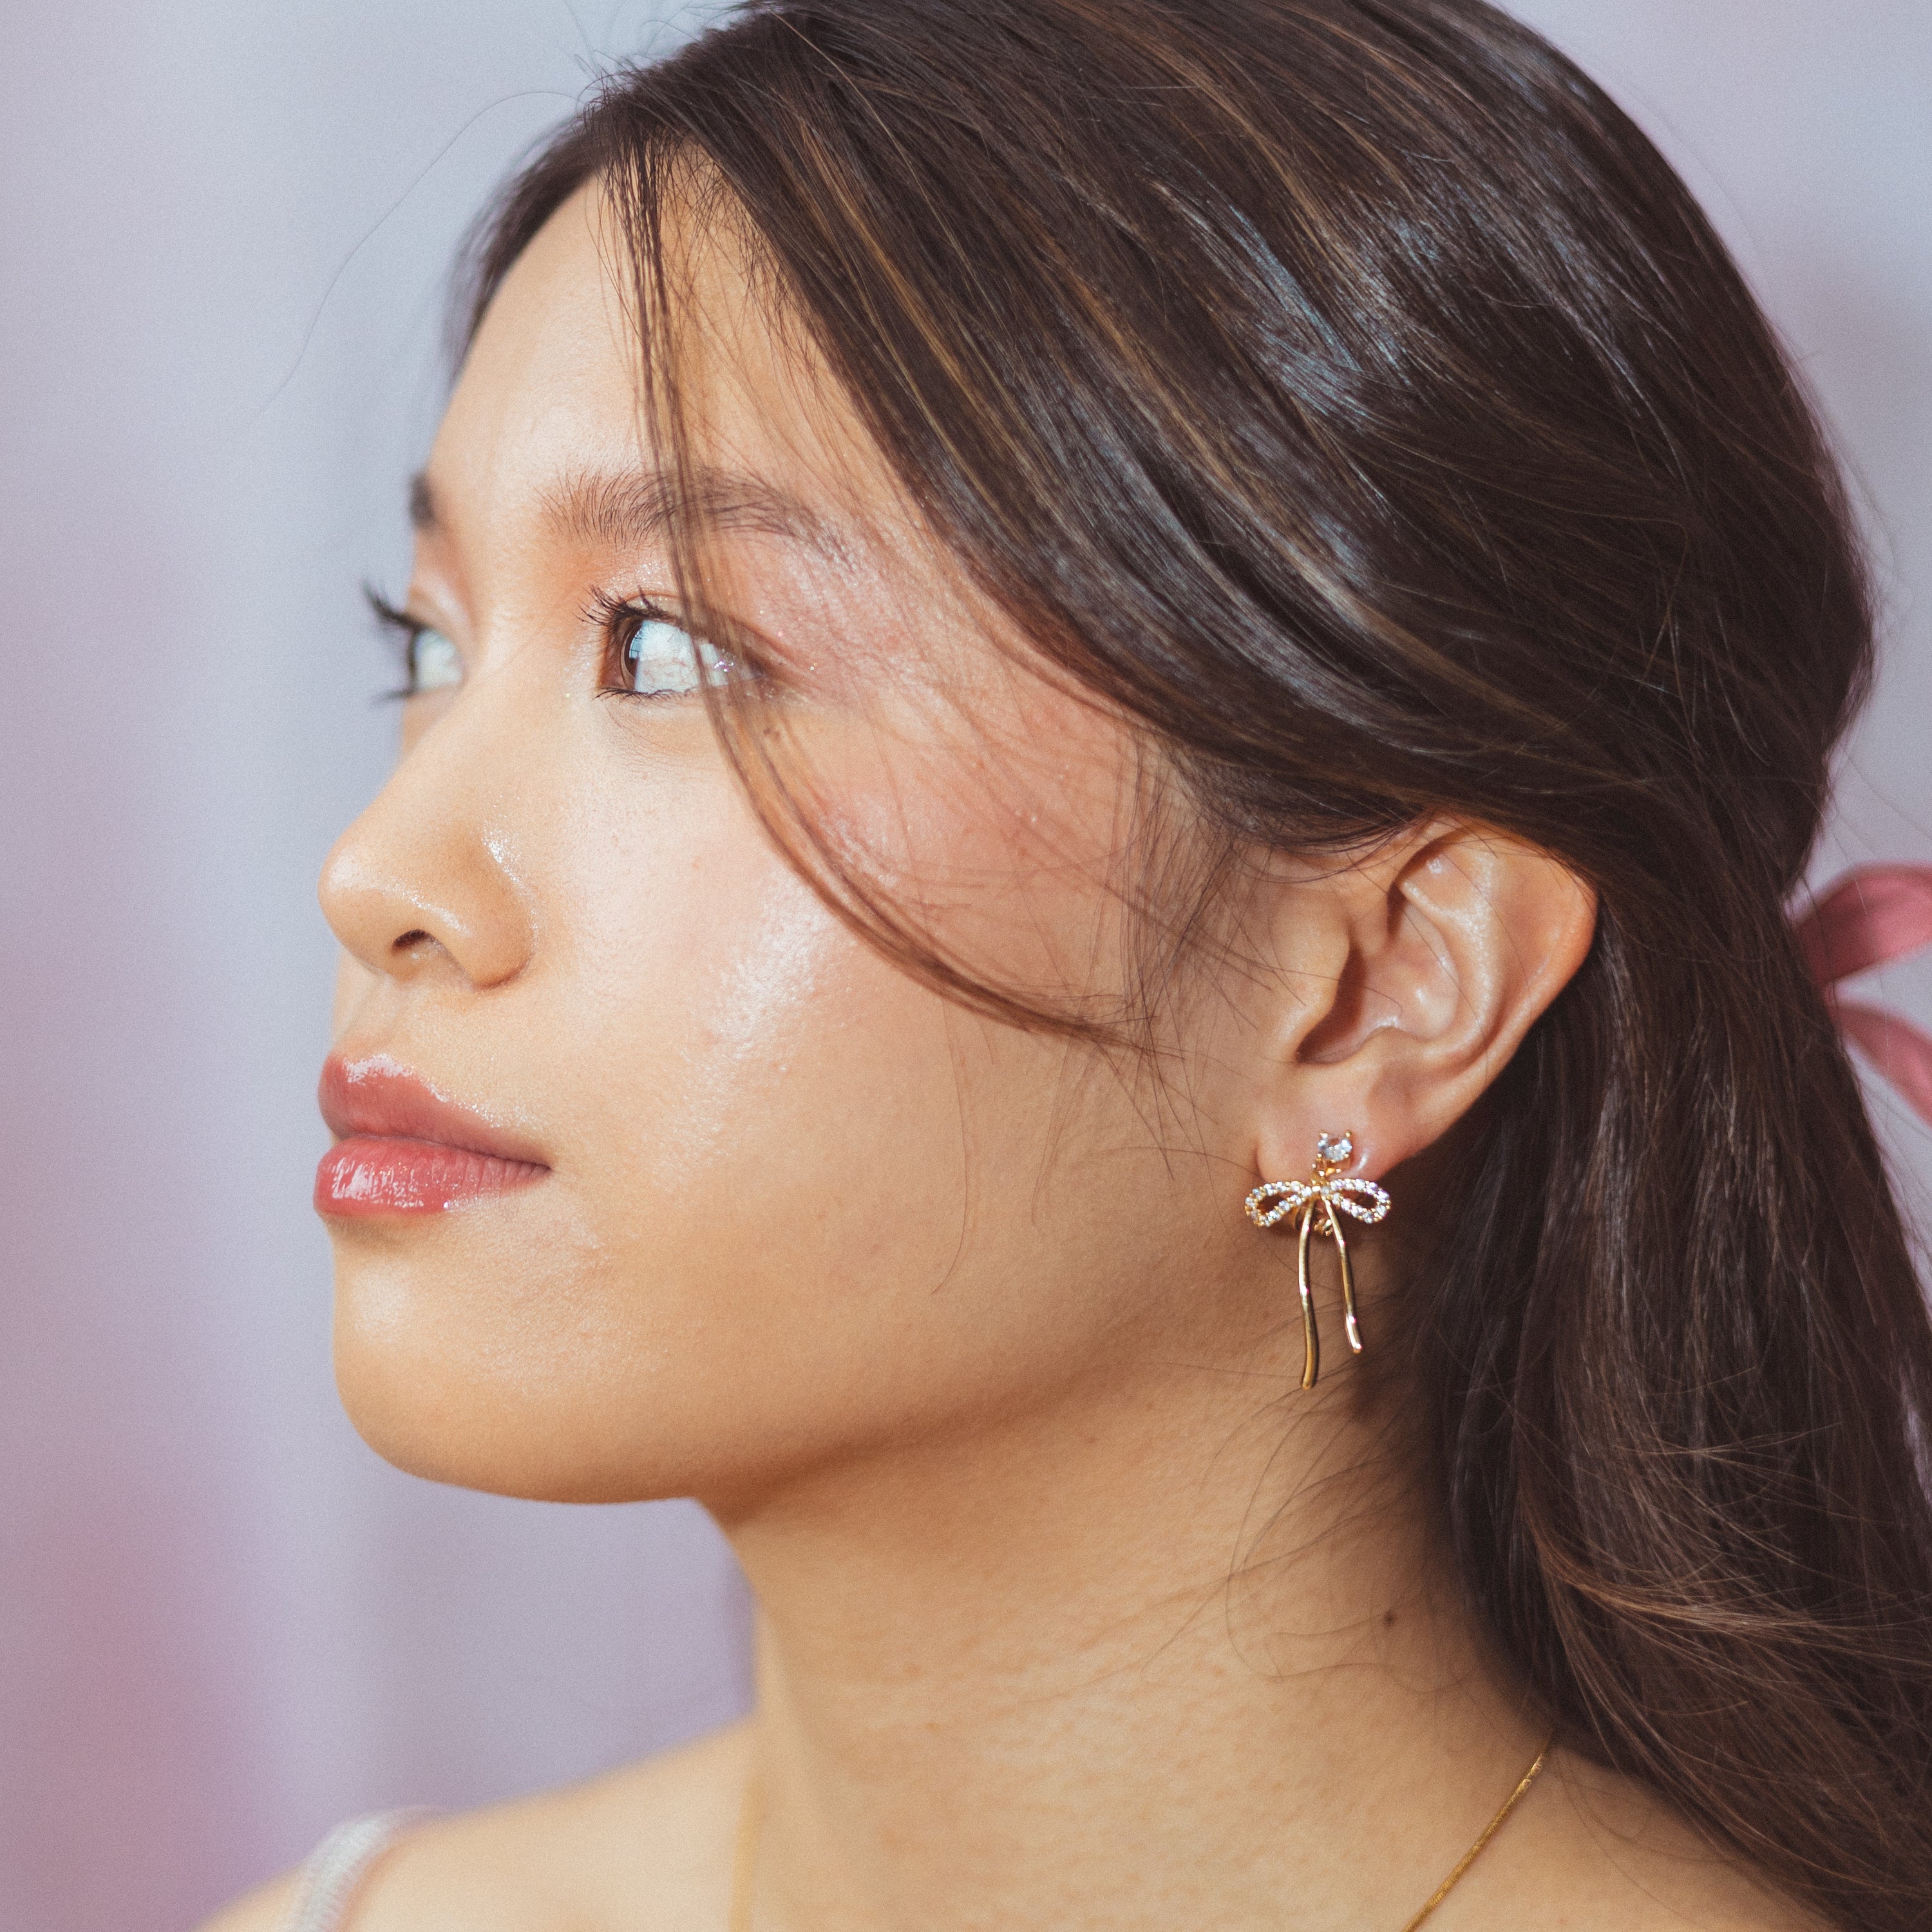 A model wearing the Anna Clip On Earrings, offer an adjustable fit and 24-hour hold for unrivaled comfort. Elevate your style effortlessly with the touch of elegance these earrings provide.